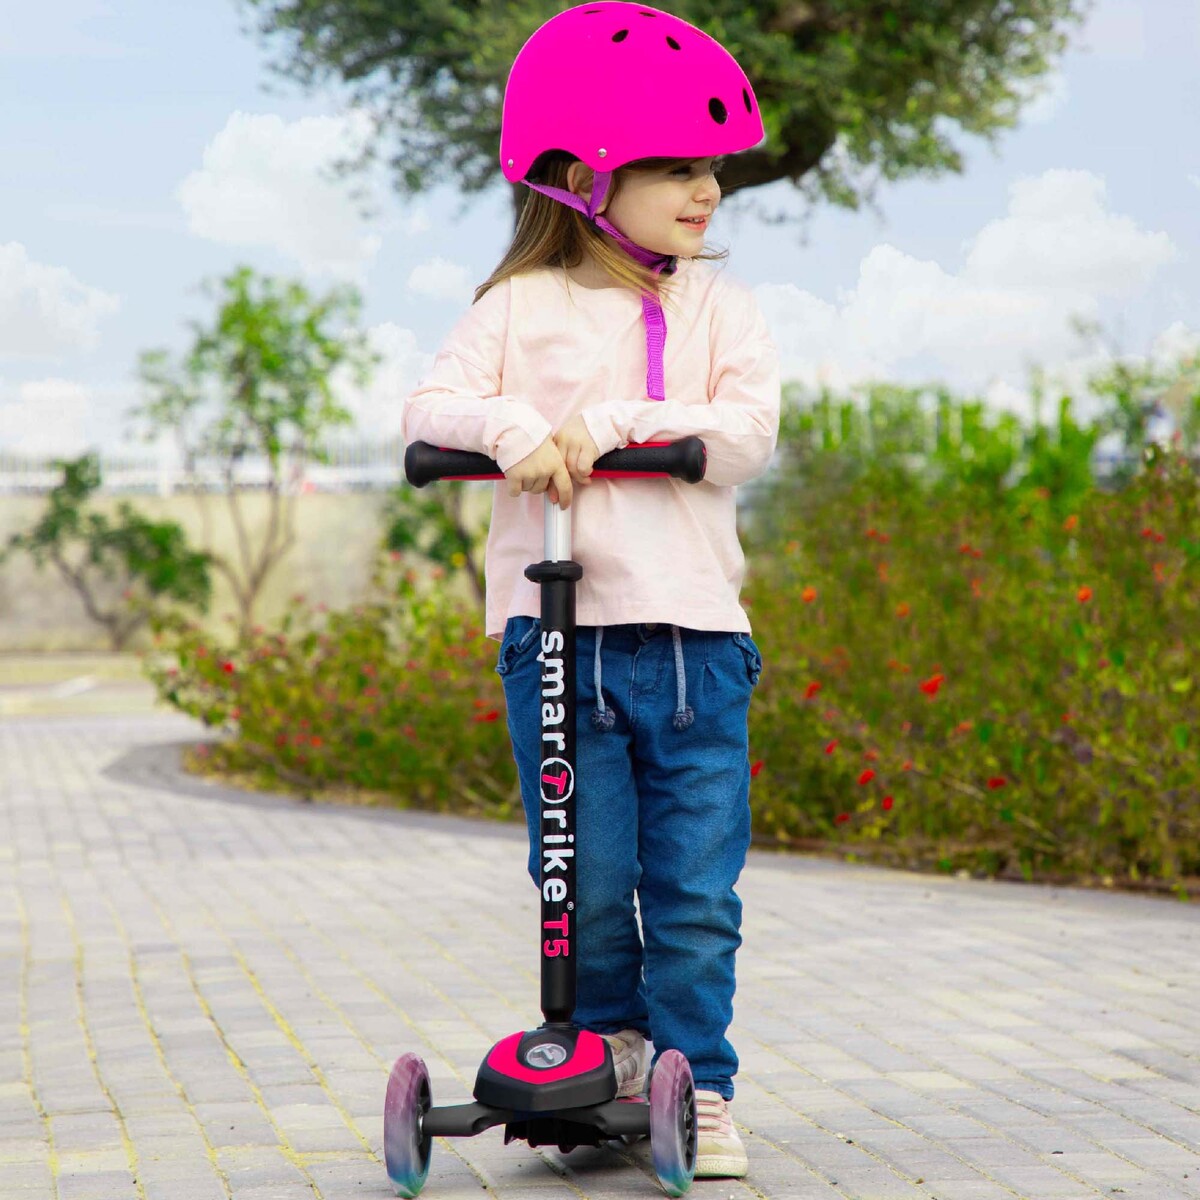 Smart Trike Scooter T5 with Safety Gear, Pink, 2010101